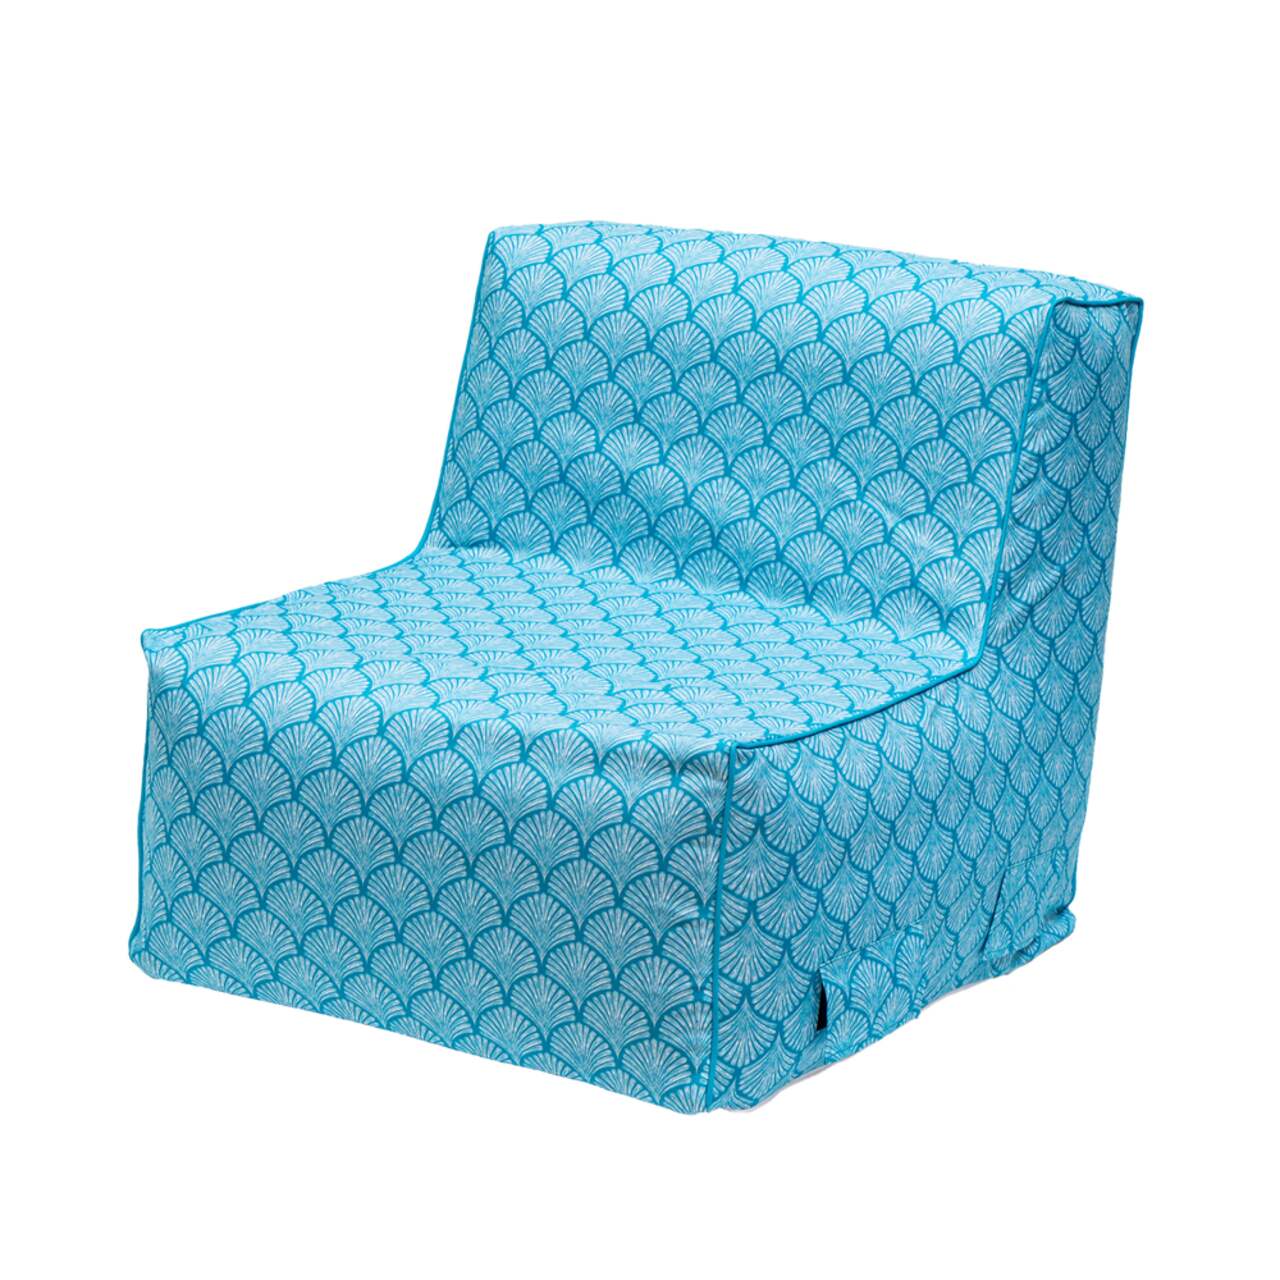 Fauteuil gonflable - air bed - Bleu